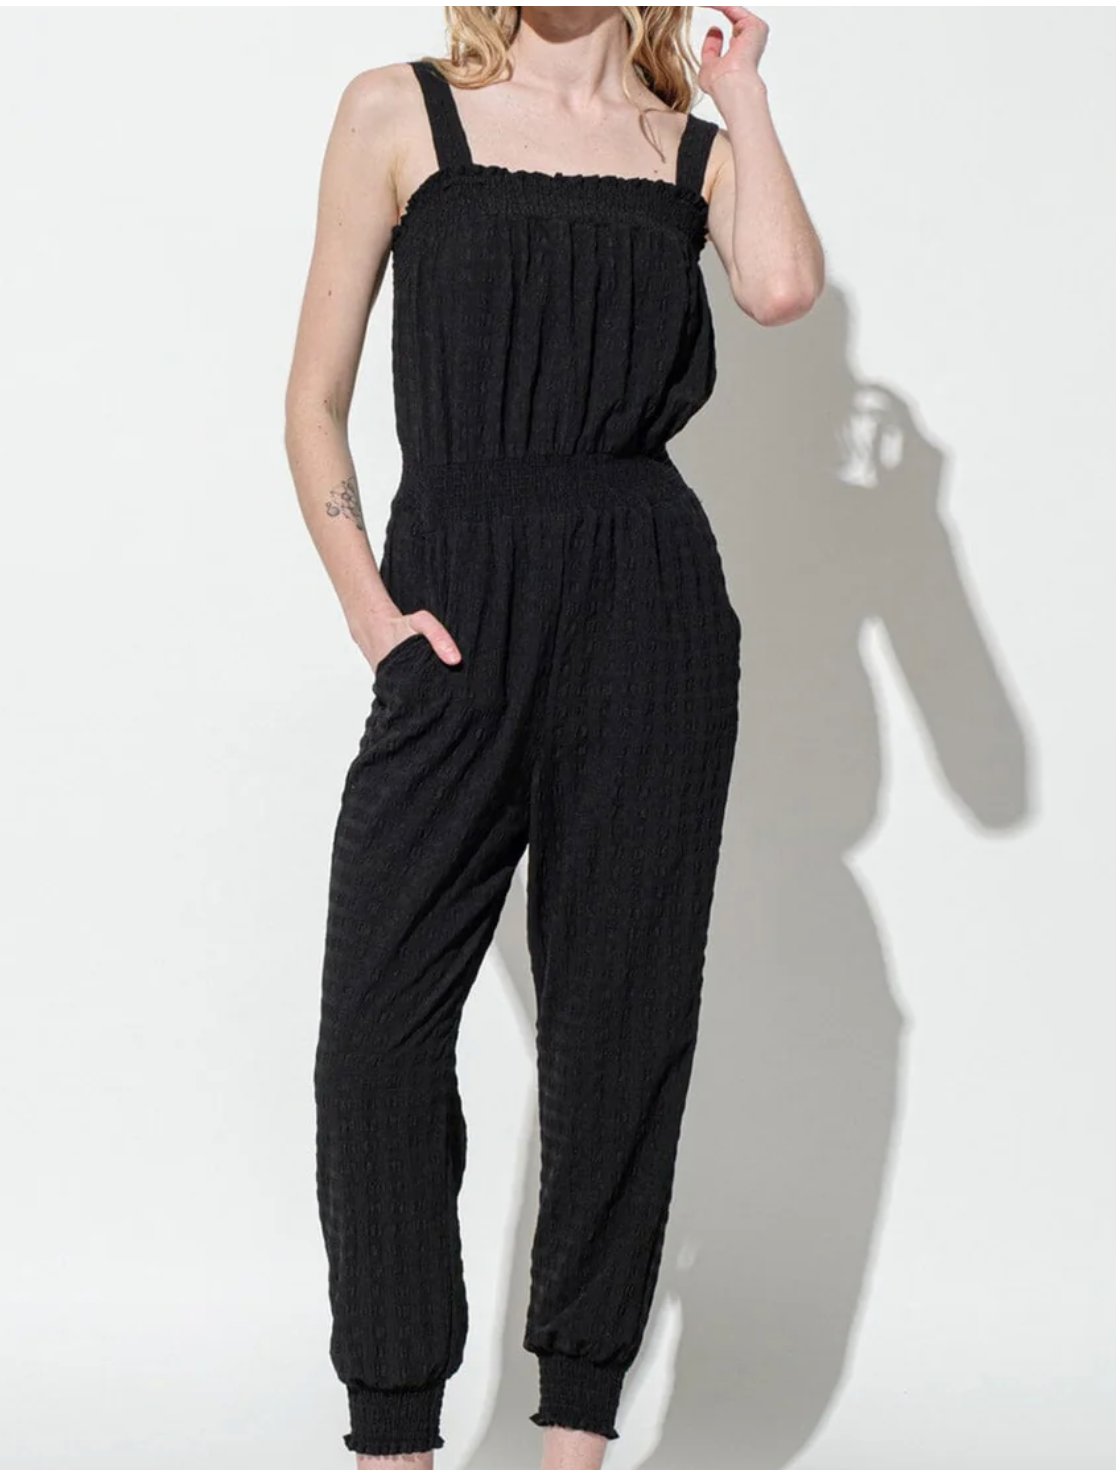 Chic Charm: Women's Sleeveless Smock Waist Jumpsuit With Pockets